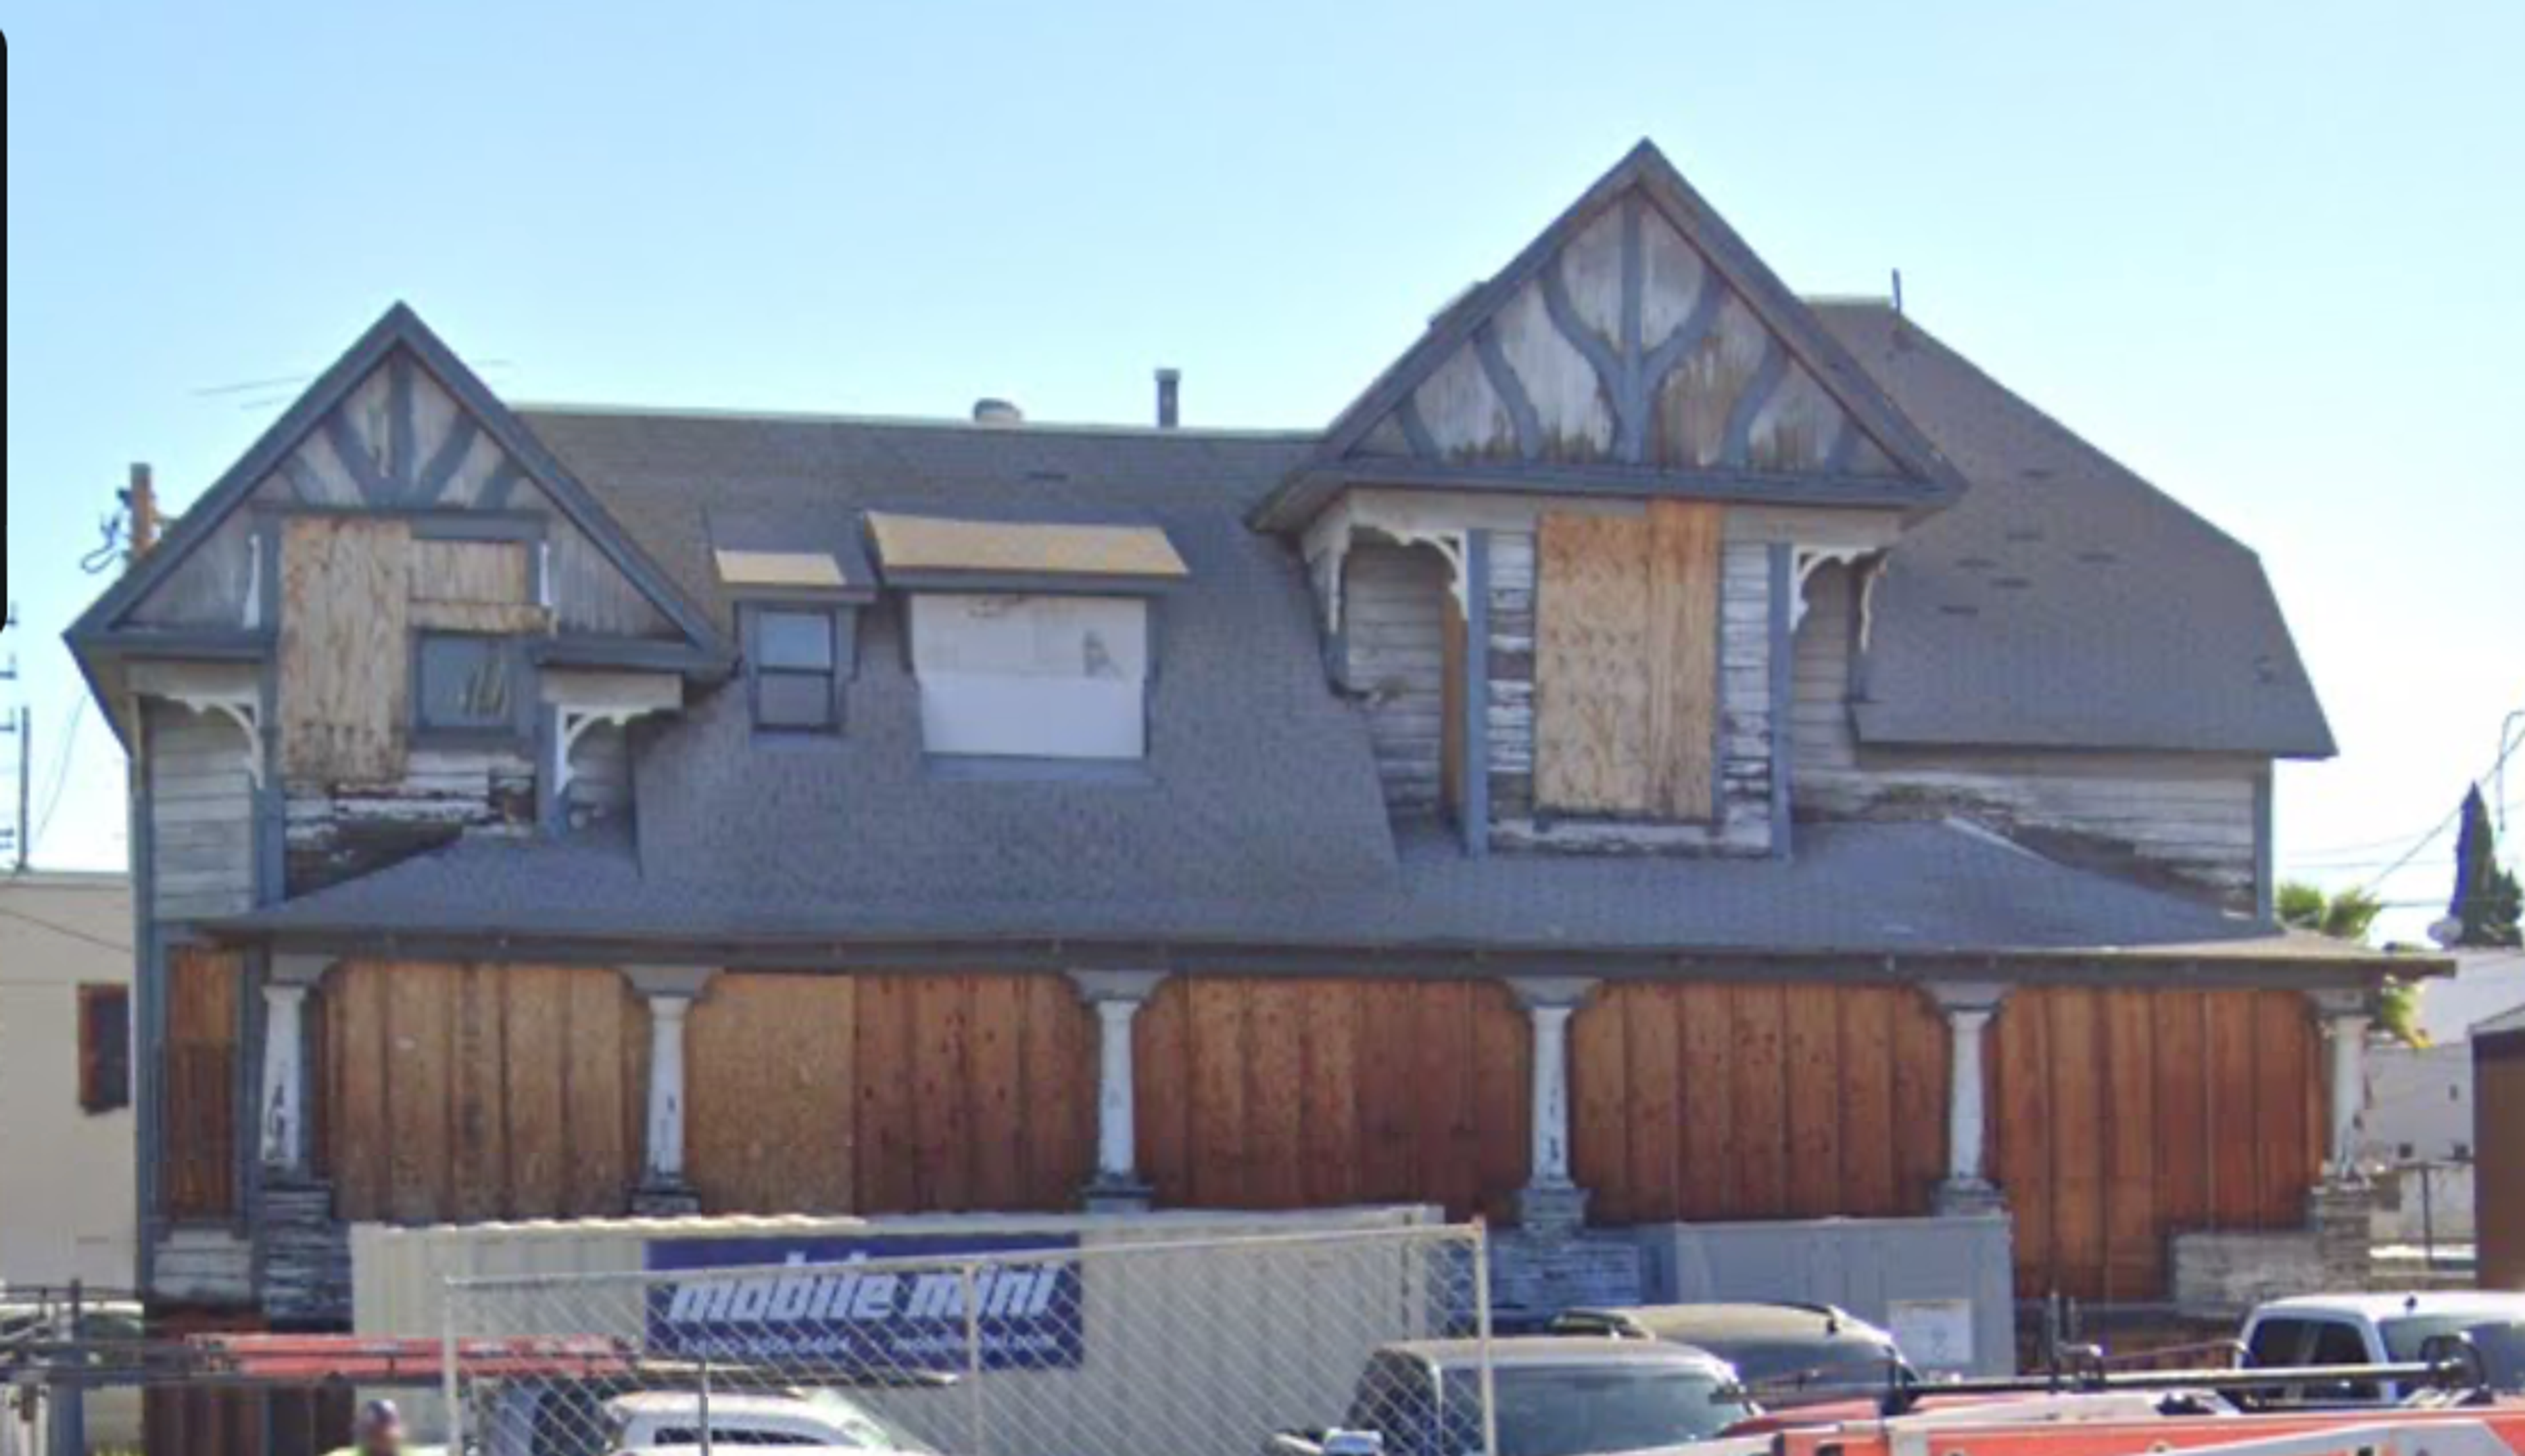 Street view of the boarded-up 1895 Peabody Werden house.